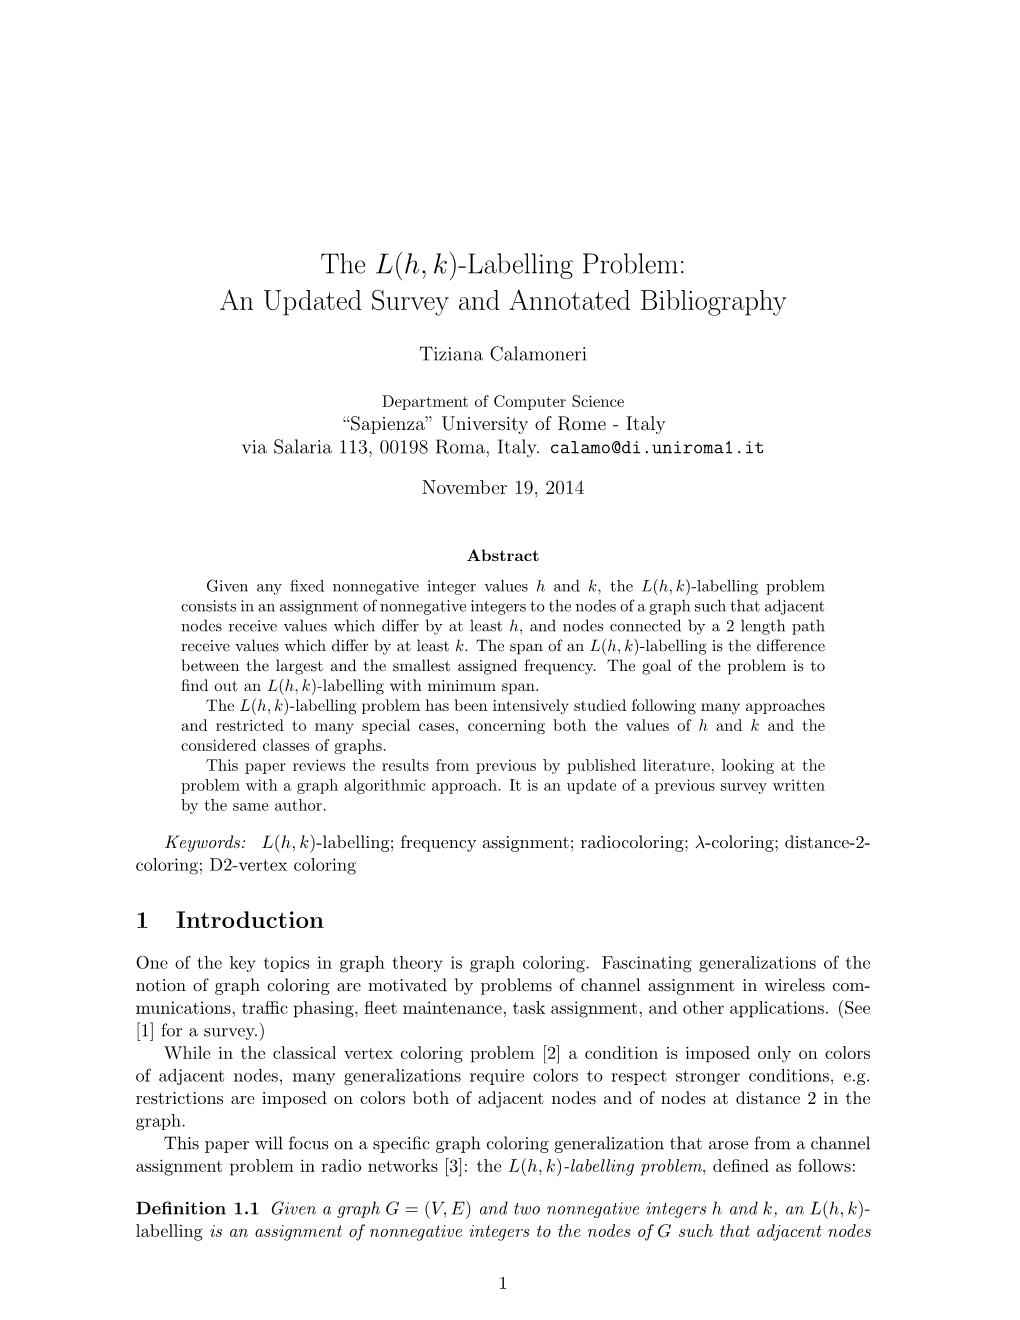 Labelling Problem: an Updated Survey and Annotated Bibliography